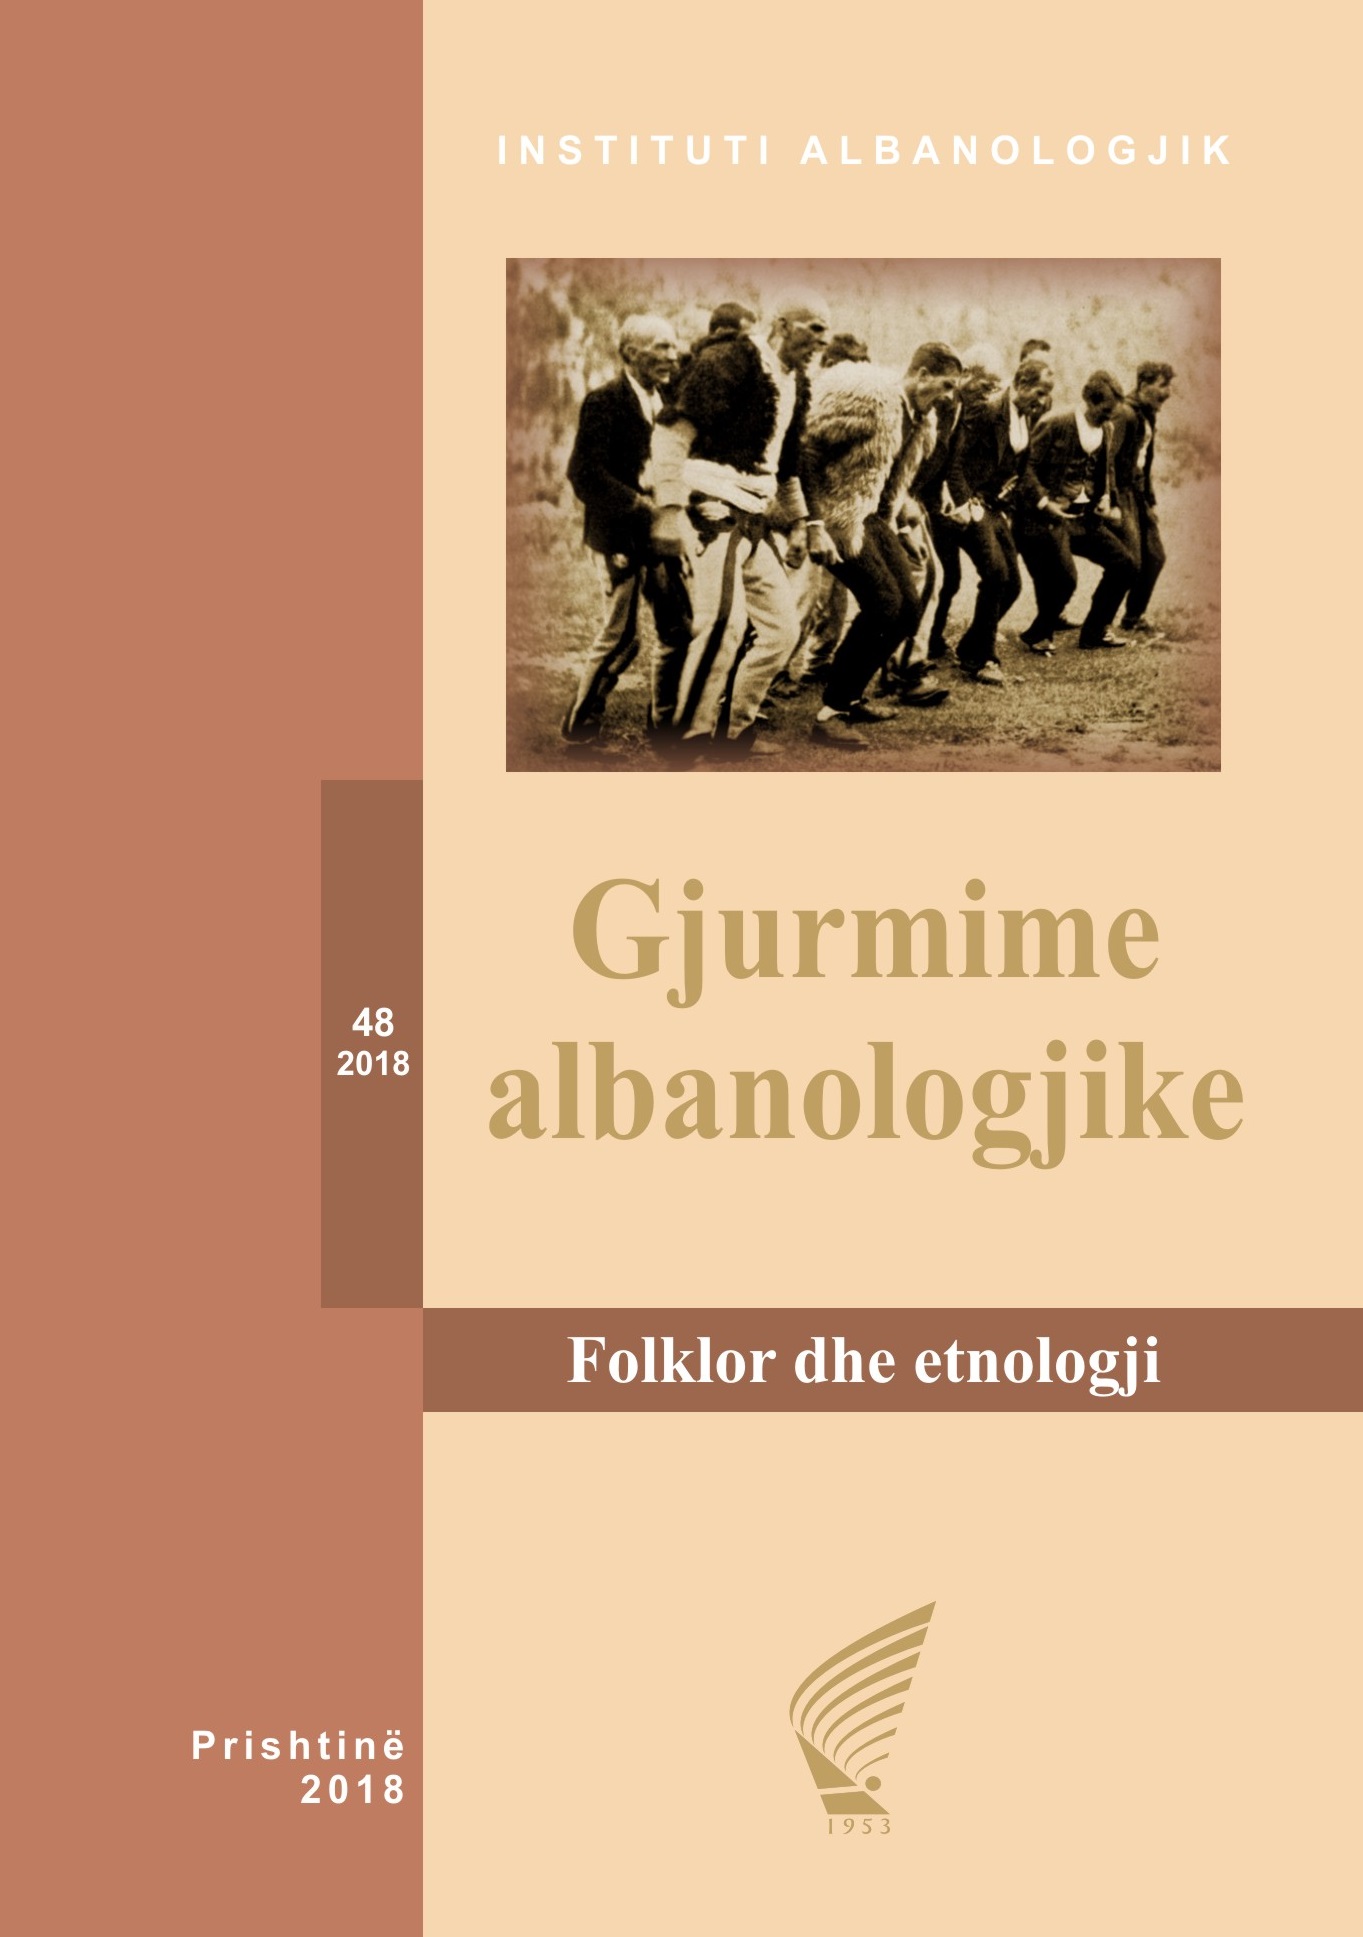 SCIENTIFIC CHRONICLE OF THE ACTIVITIES OF THE ALBANIAN INSTITUTE OF FOLKLORE AND ETHNOLOGY FOR 2018 Cover Image